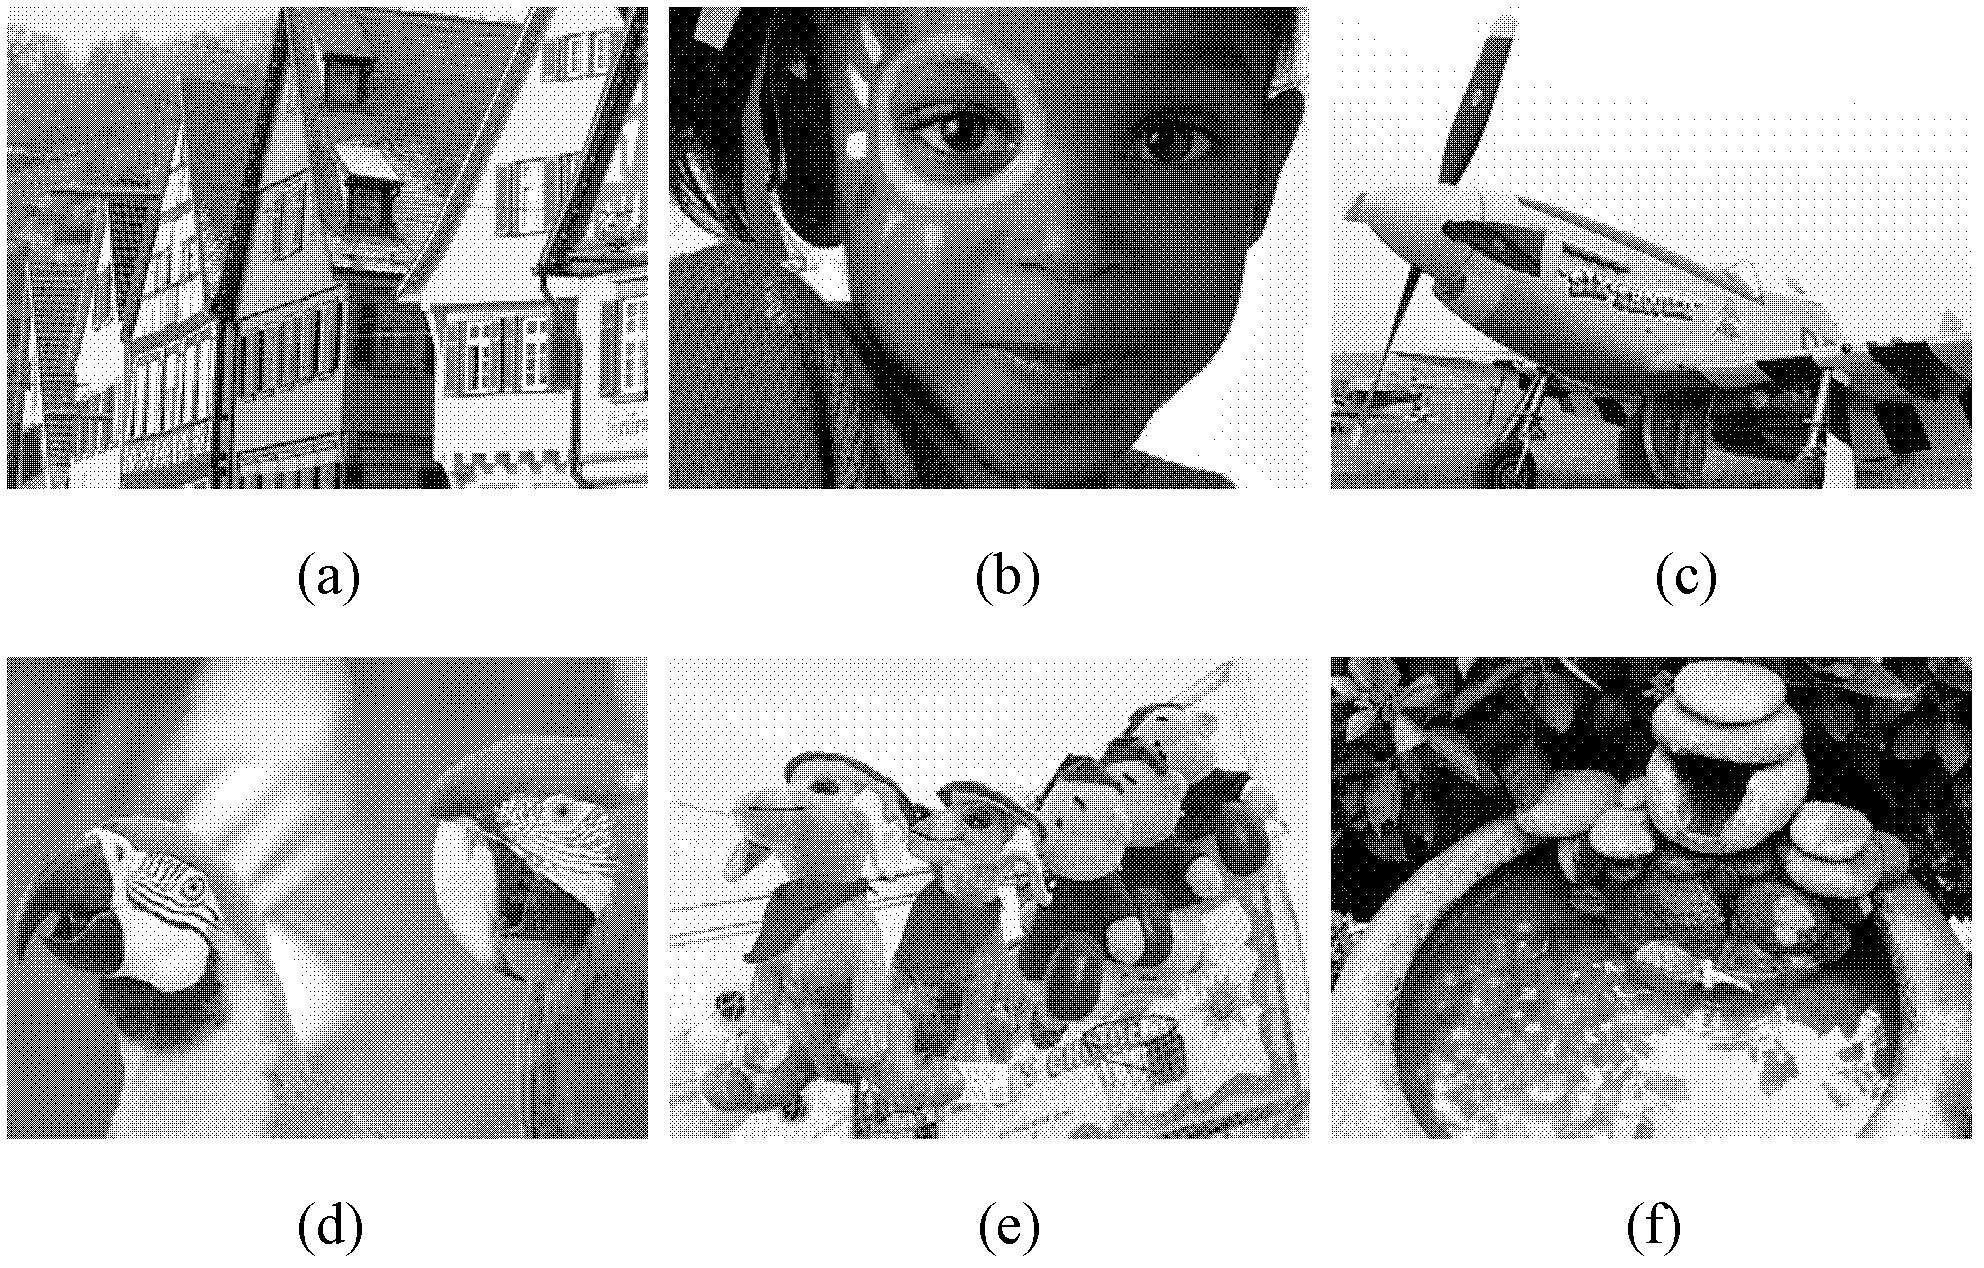 Image super resolution (SR) reconstruction method based on subspace projection and neighborhood embedding